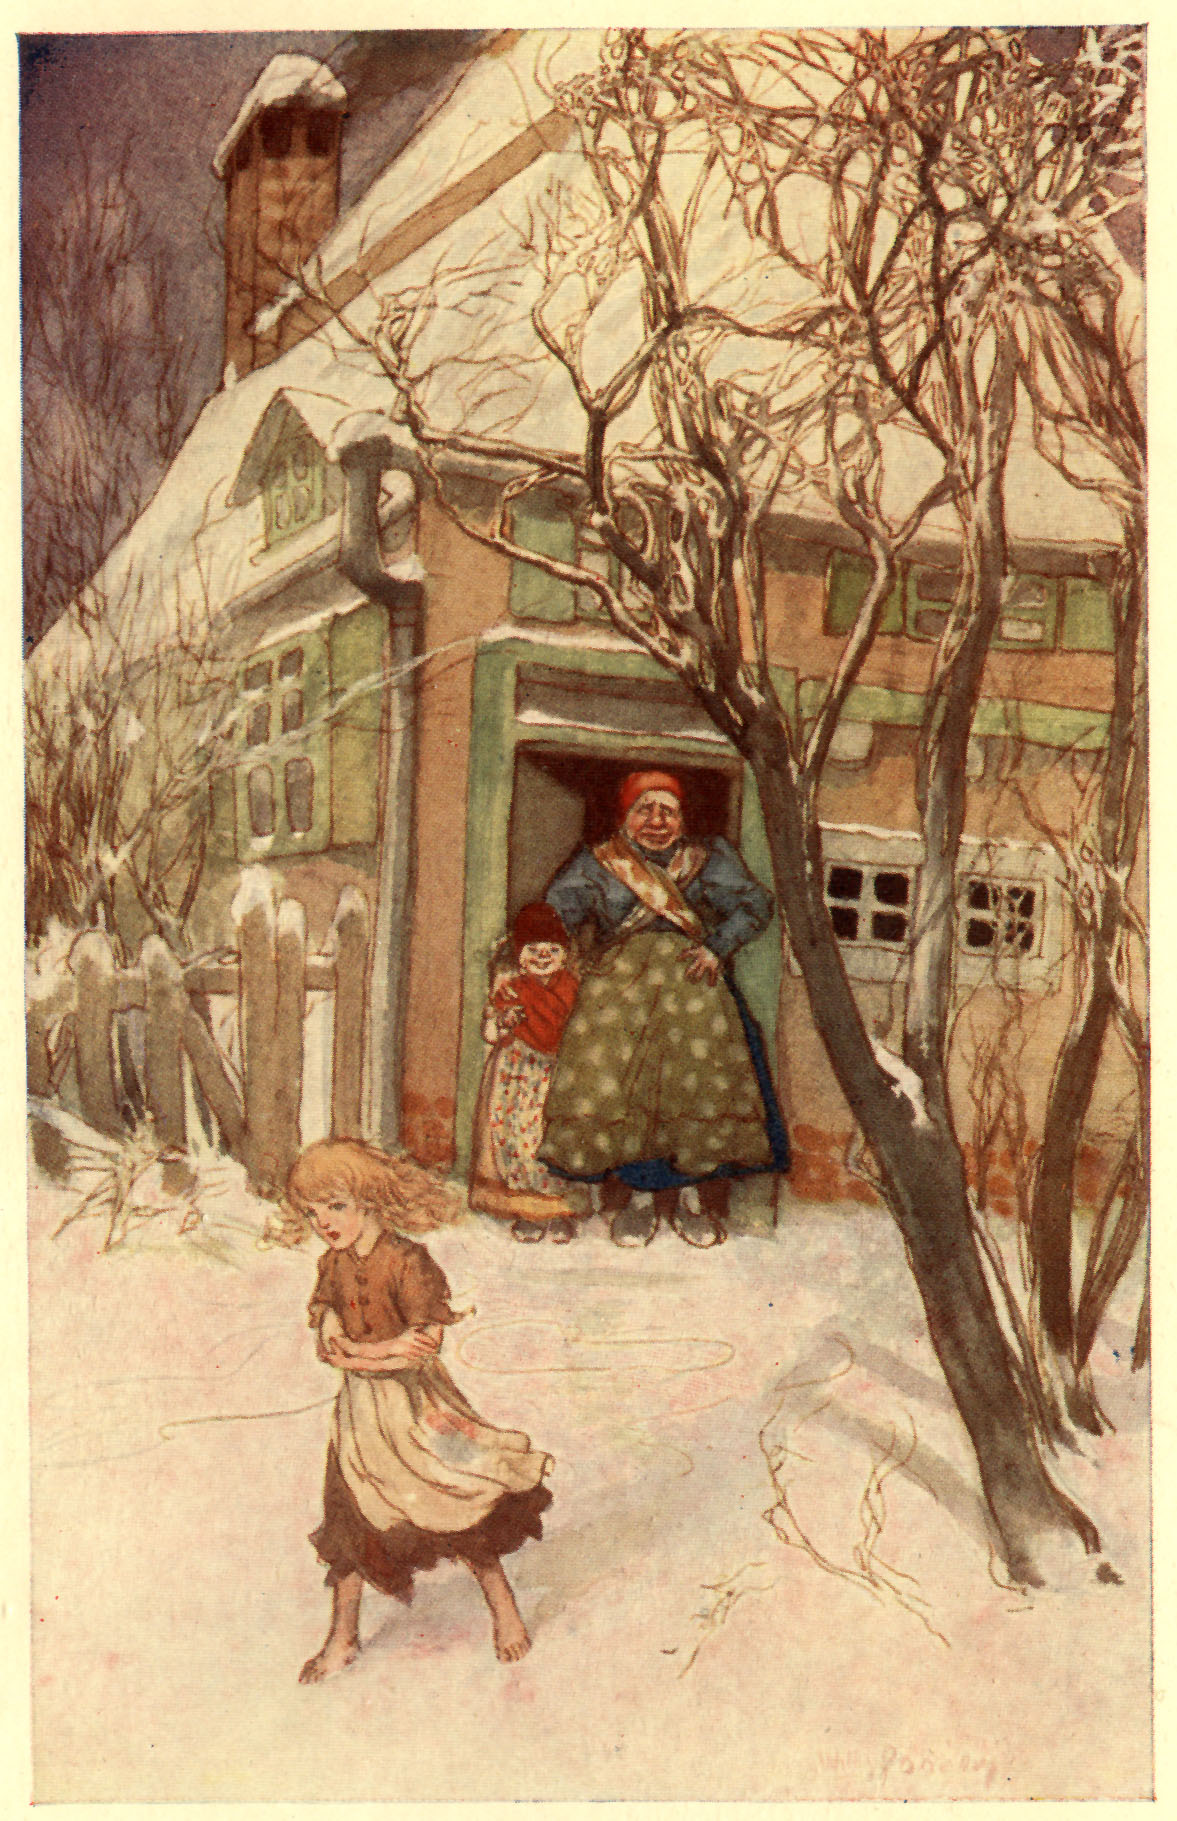 large woman and child standing in doorway of cottage as skinny girl walks away in the snow